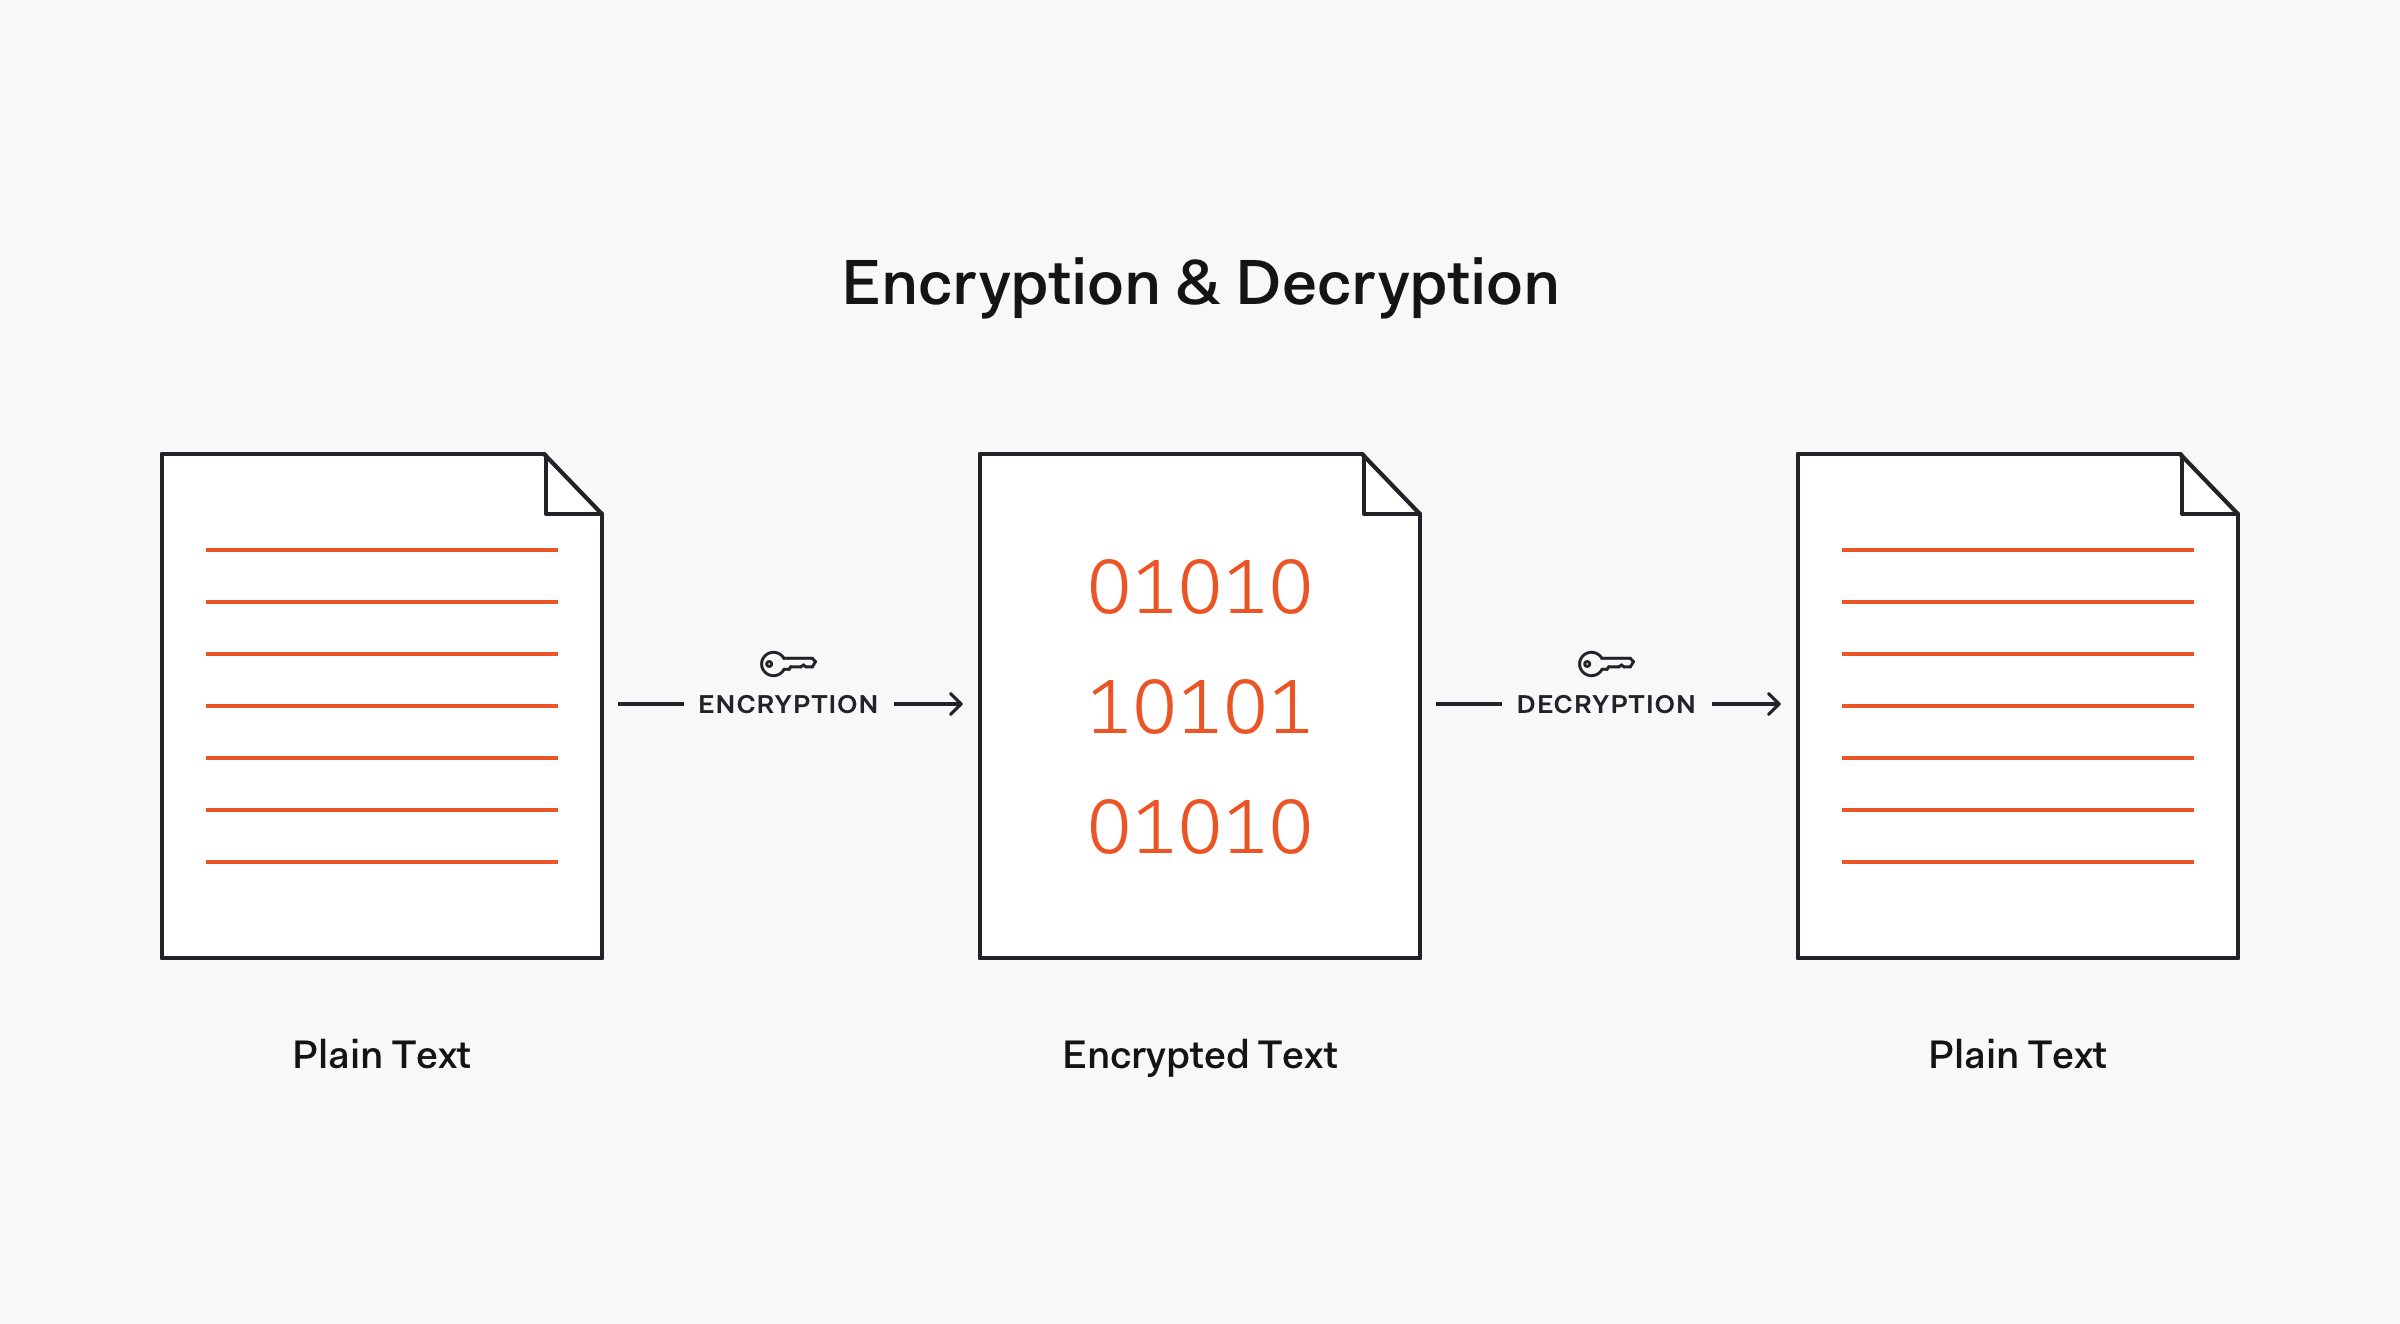 Encryption and decryption flow example - two-way